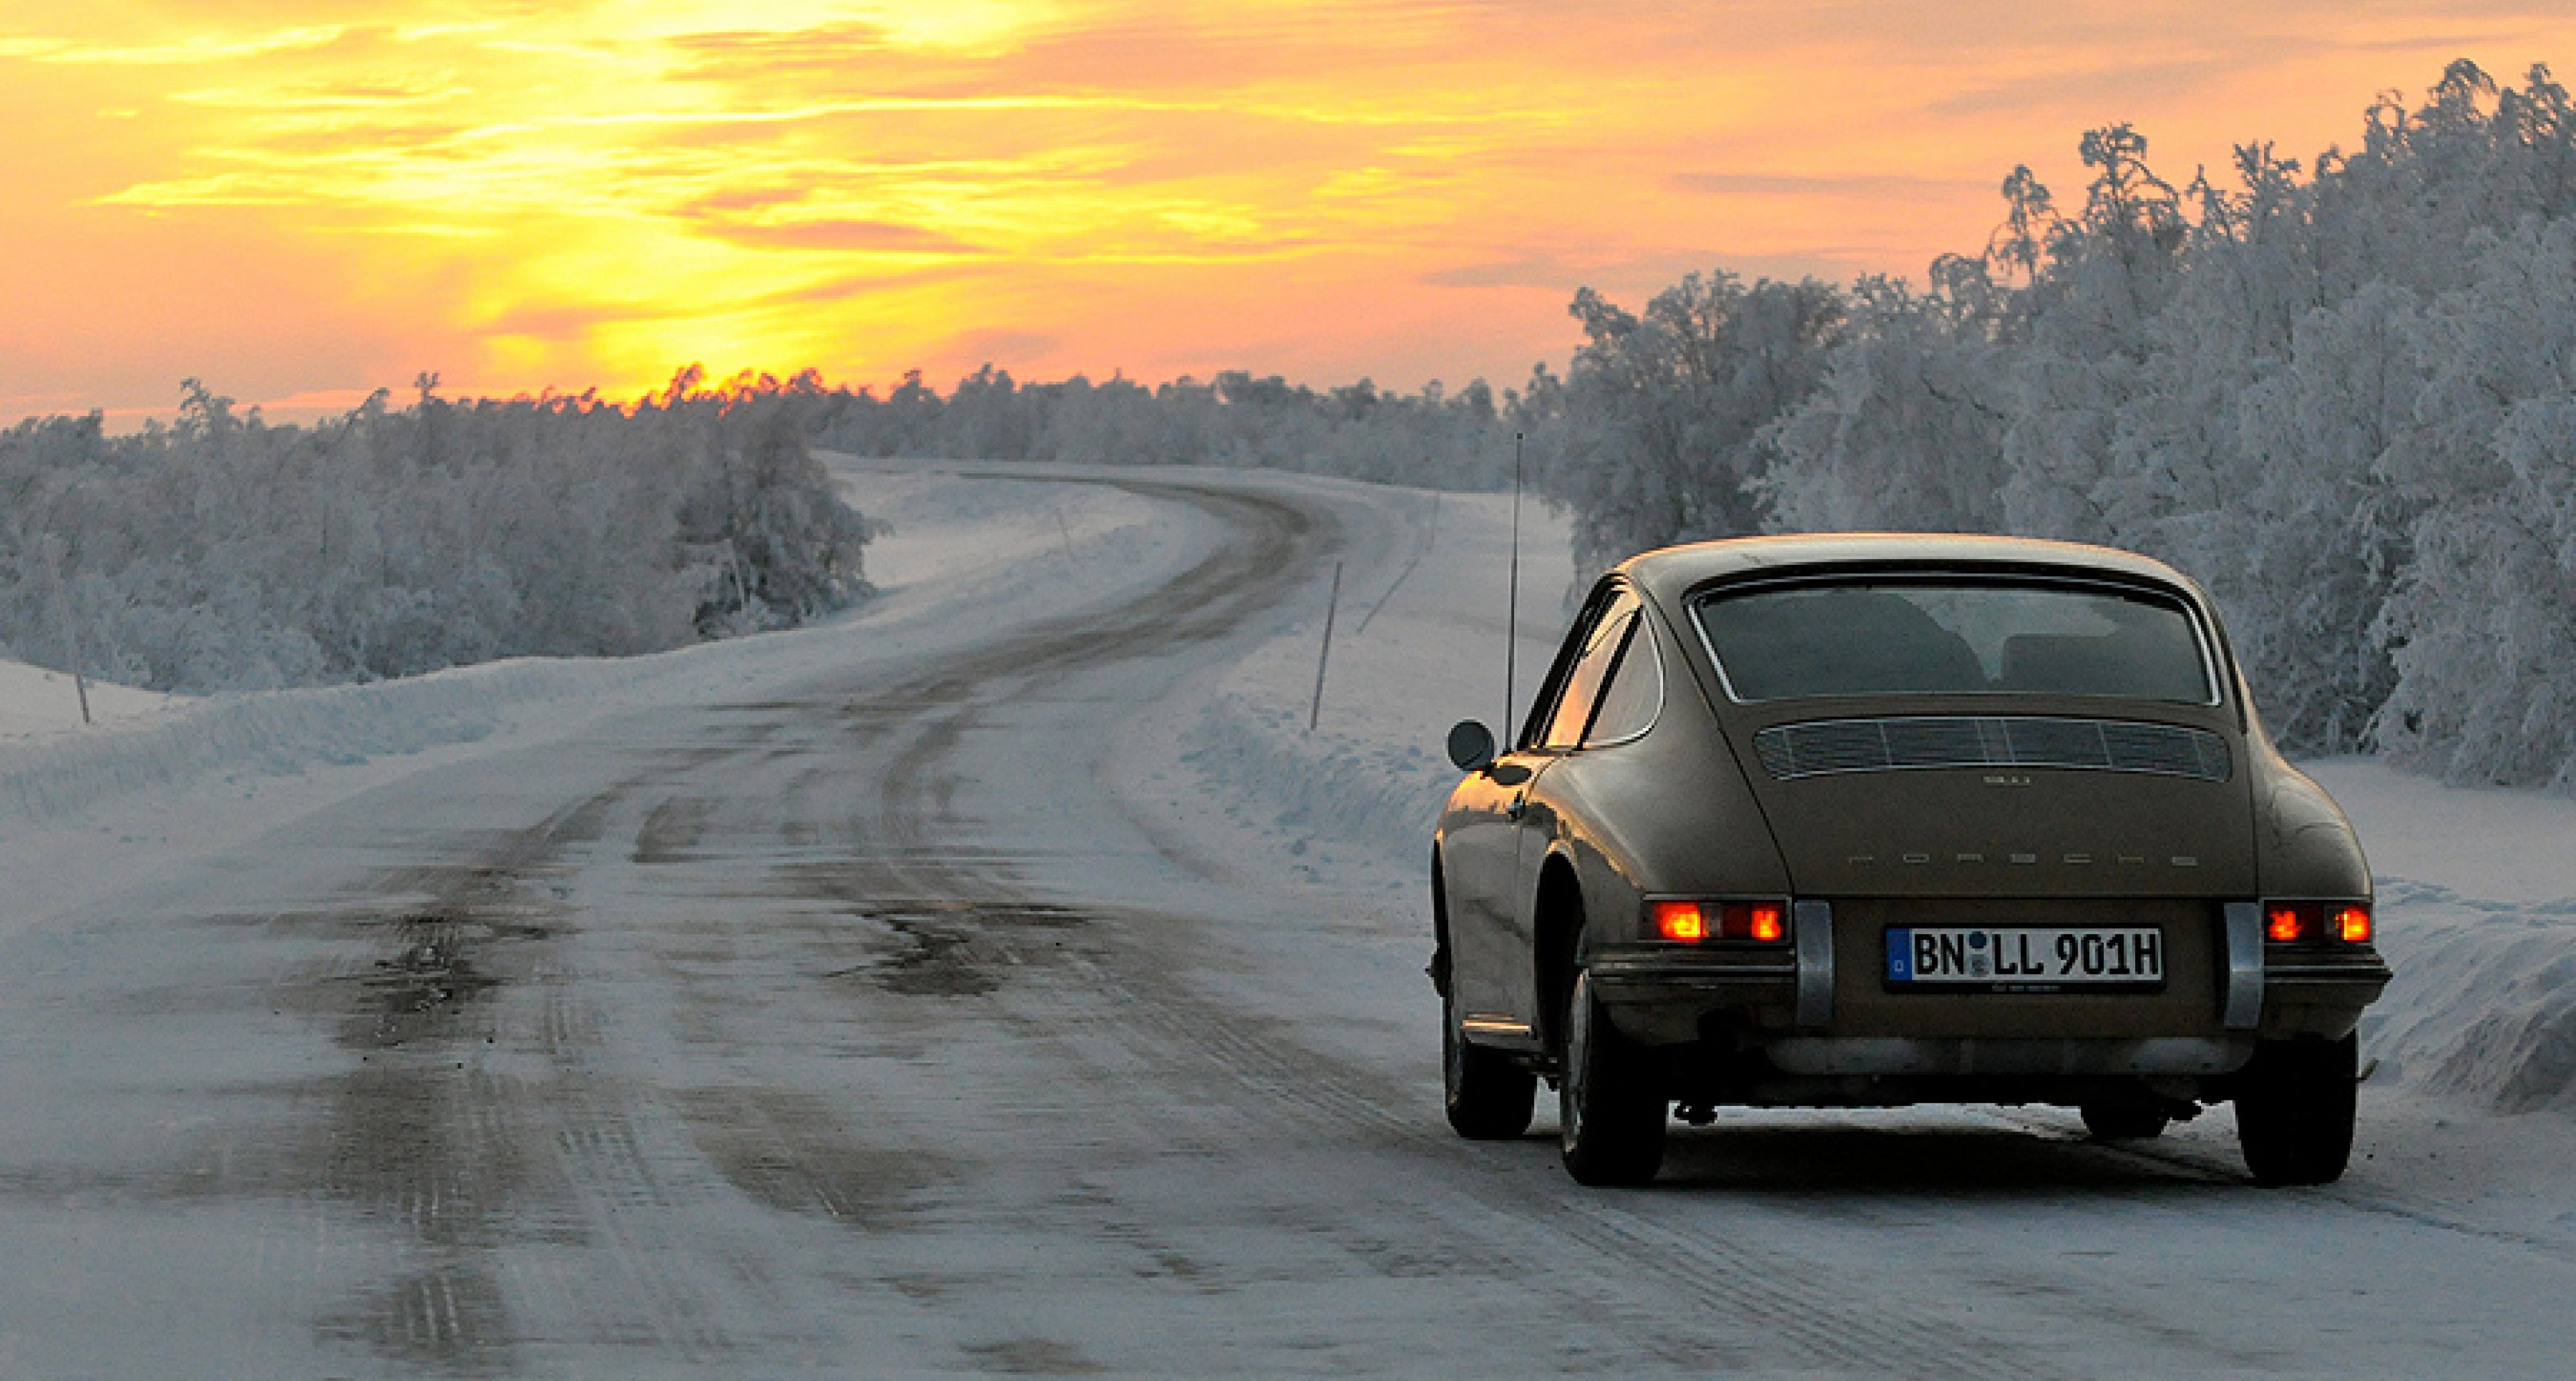 68 Best Can antique plates car be drove in winter for iPhone Wallpaper